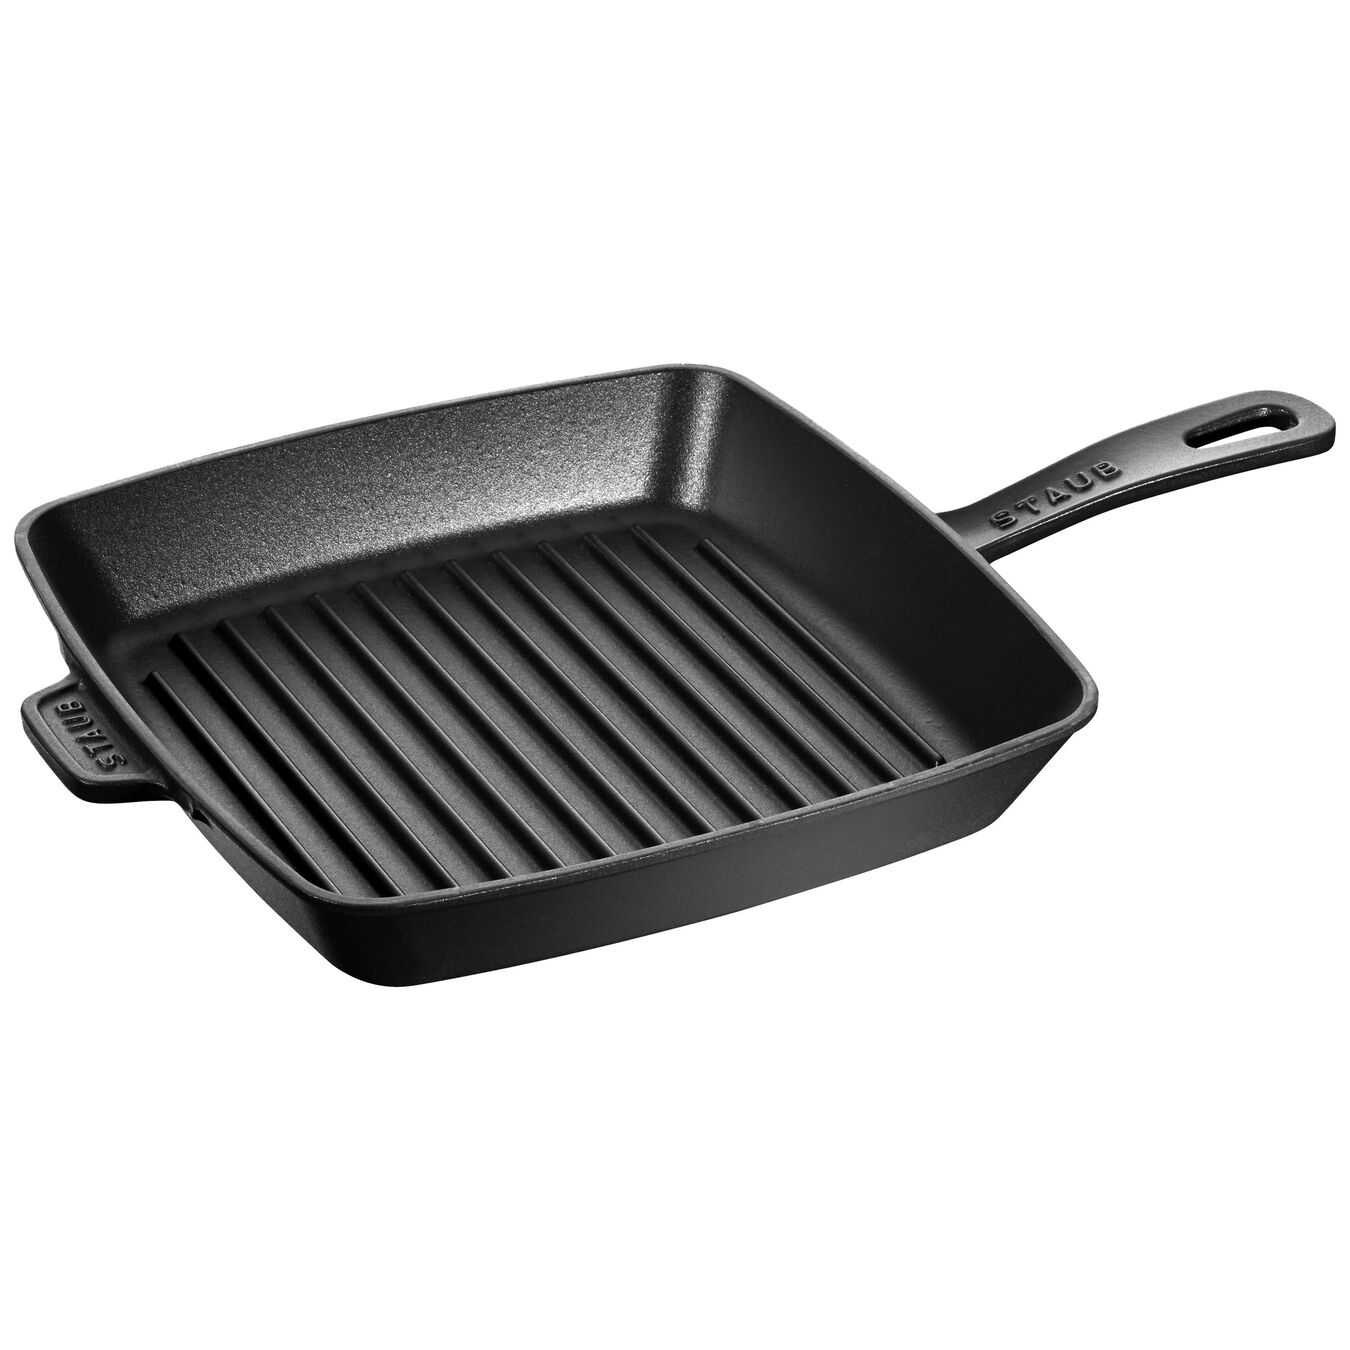 26 cm cast iron square American grill, black - Visual Imperfections,,large 1